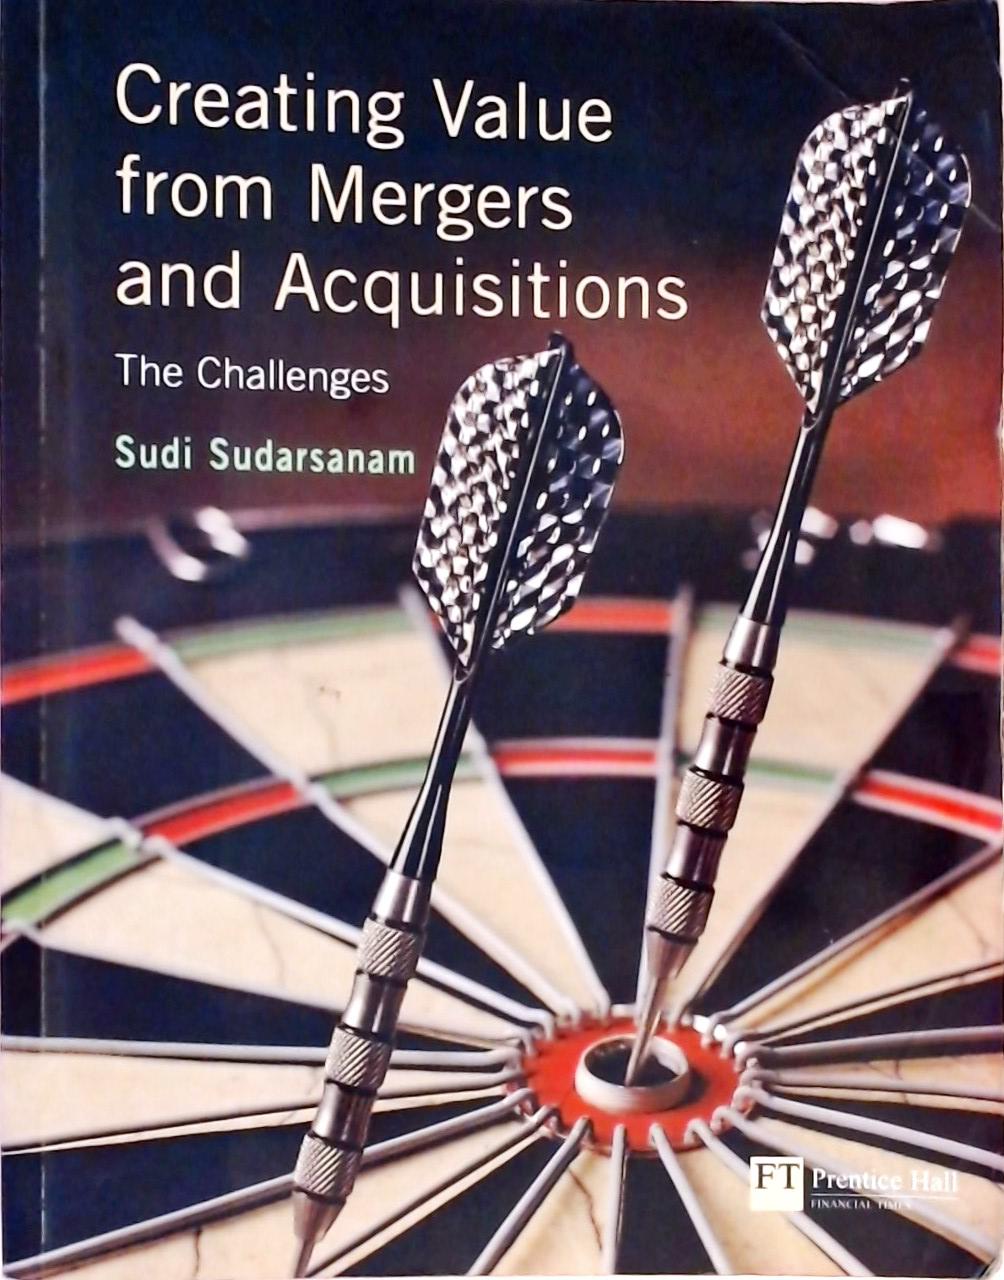 Creating Value from Mergers and Acquisitions - The Challenges